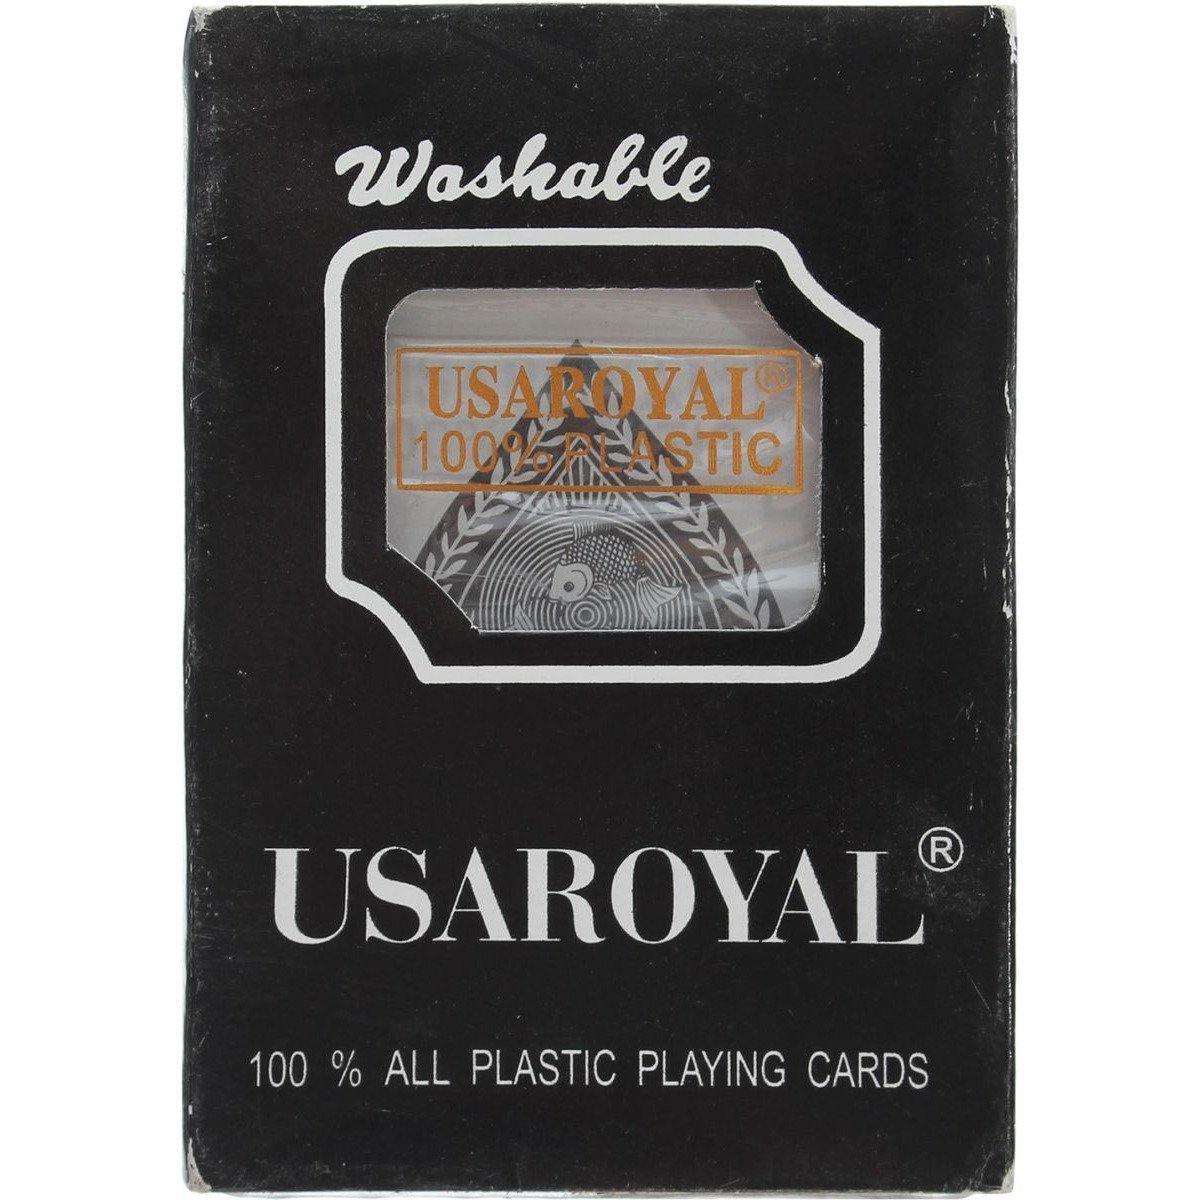 USA Royal Plastic Playing Cards In Box - BumbleToys - 18+, 5-7 Years, 8+ Years, 8-13 Years, Boys, Card & Board Games, Clearance, Girls, Puzzle & Board & Card Games, Toy House